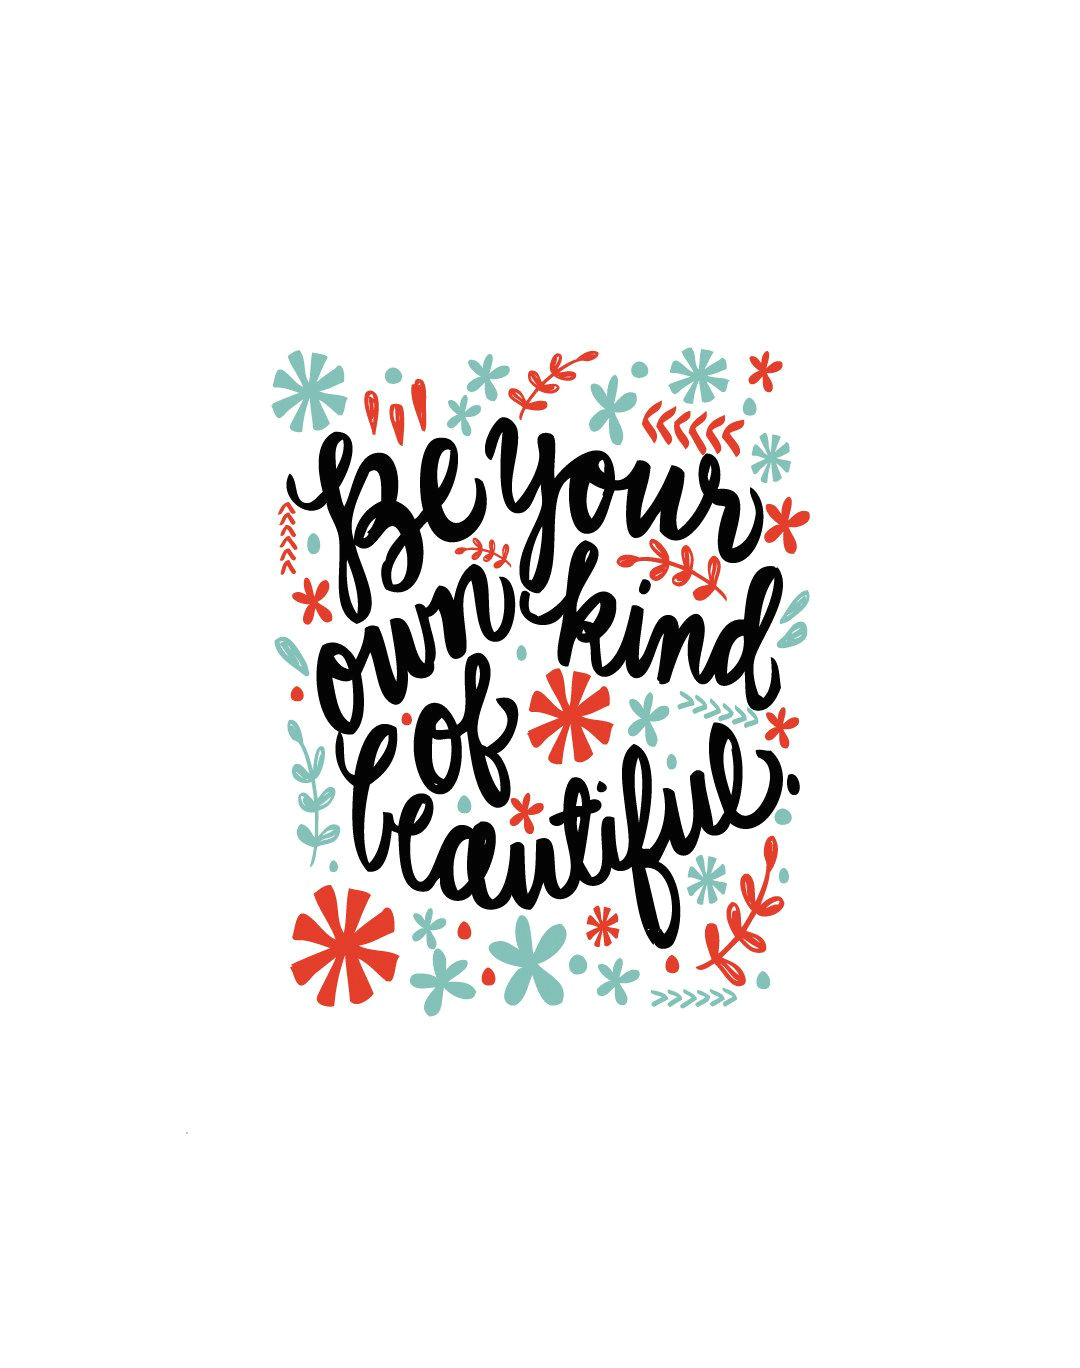 be your own kind of beautiful quote 8x10 hand drawn and hand lettered bright color quote on white background by mollymattin on etsy